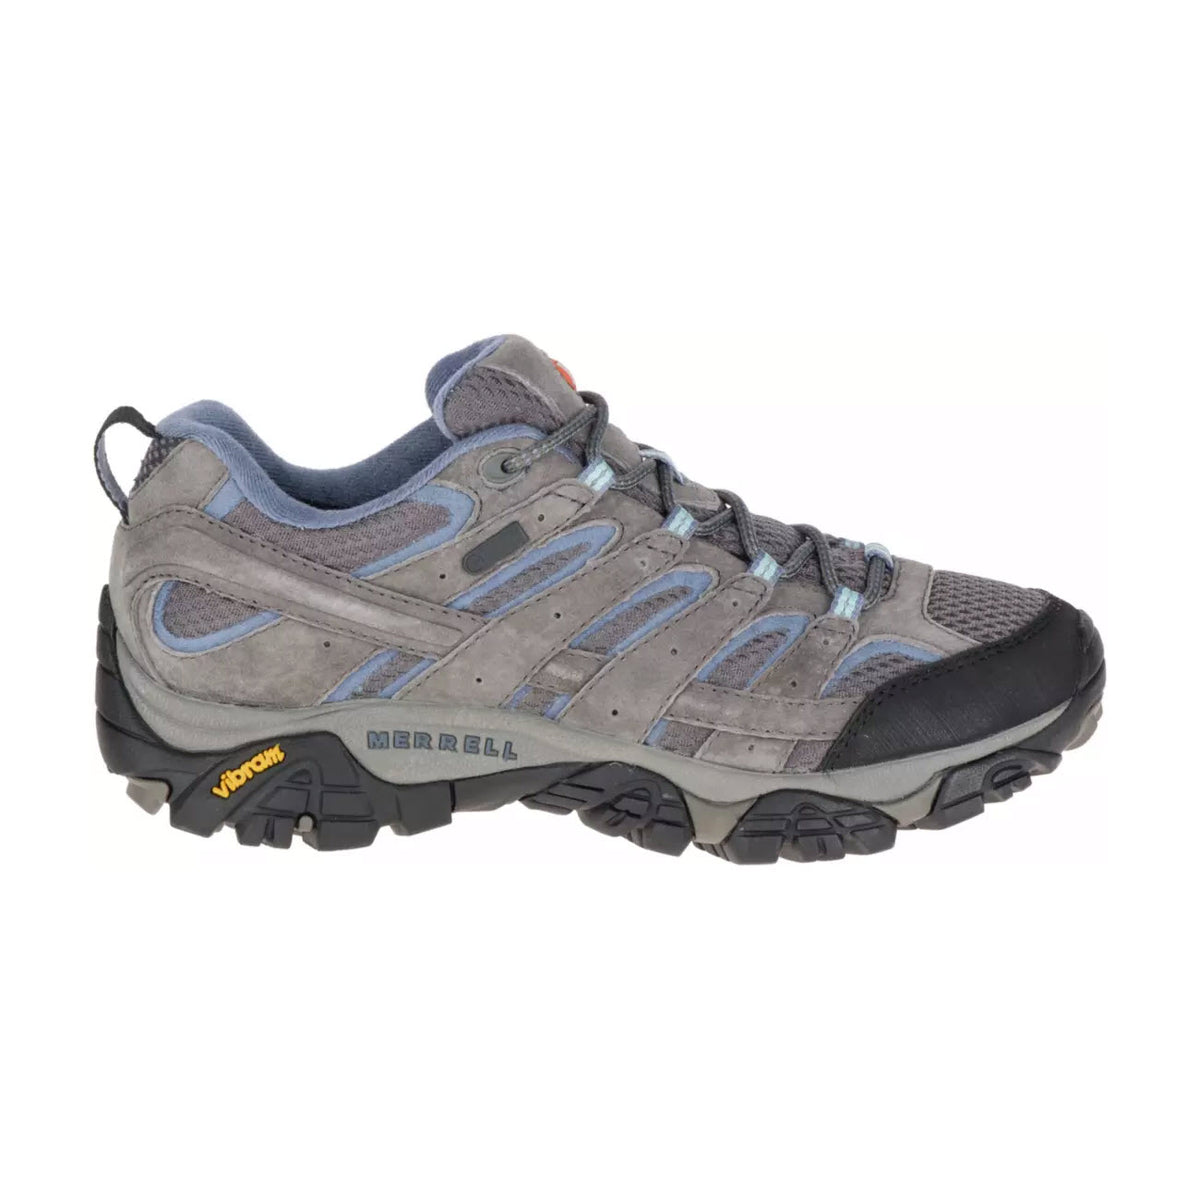 A single waterproof Merrell MOAB 2 Granite - Womens hiking shoe featuring gray and blue colors with a rugged sole design.